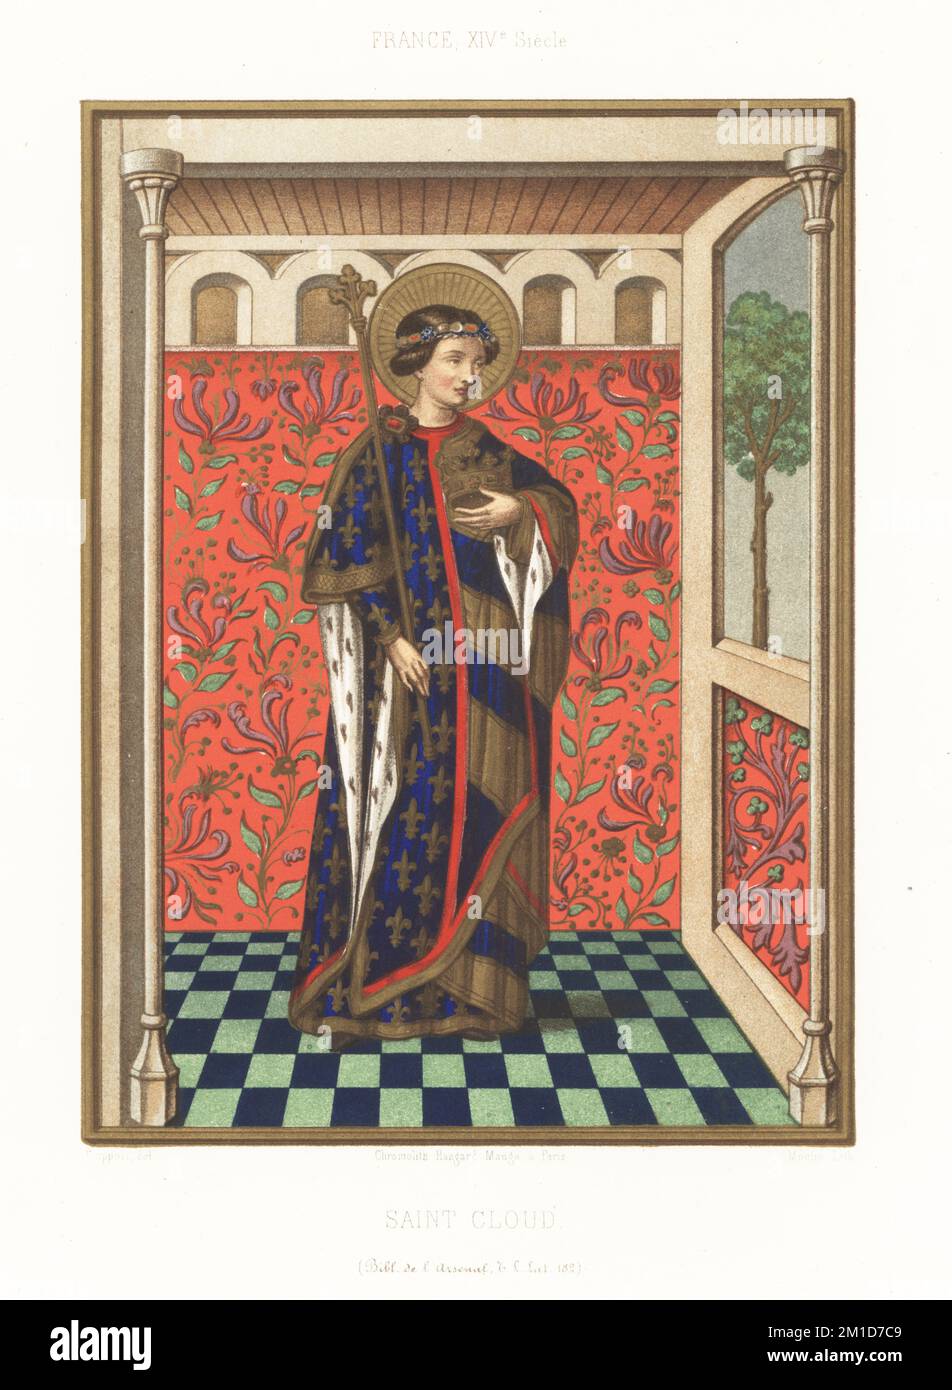 Saint Clodoald or Saint Cloud, Merovingian prince, grandson of Clovis I and son of Chlodomer, 522-560. In halo, diadem, armorial robe with fleurs-de-lys, holding crown and sceptre. He renounced royalty and became a hermit and monk. Depicted in French costume of the 14th century. From a missal made for Denis du Moulin, Bishop of Paris, MS 182, Bibliotheque de l'Arsenal. France XIVe Siecle. Chromolithograph by Moulin after an illustration by Claudius Joseph Ciappori from Charles Louandre’s Les Arts Somptuaires, The Sumptuary Arts, Hangard-Mauge, Paris, 1858. Stock Photo